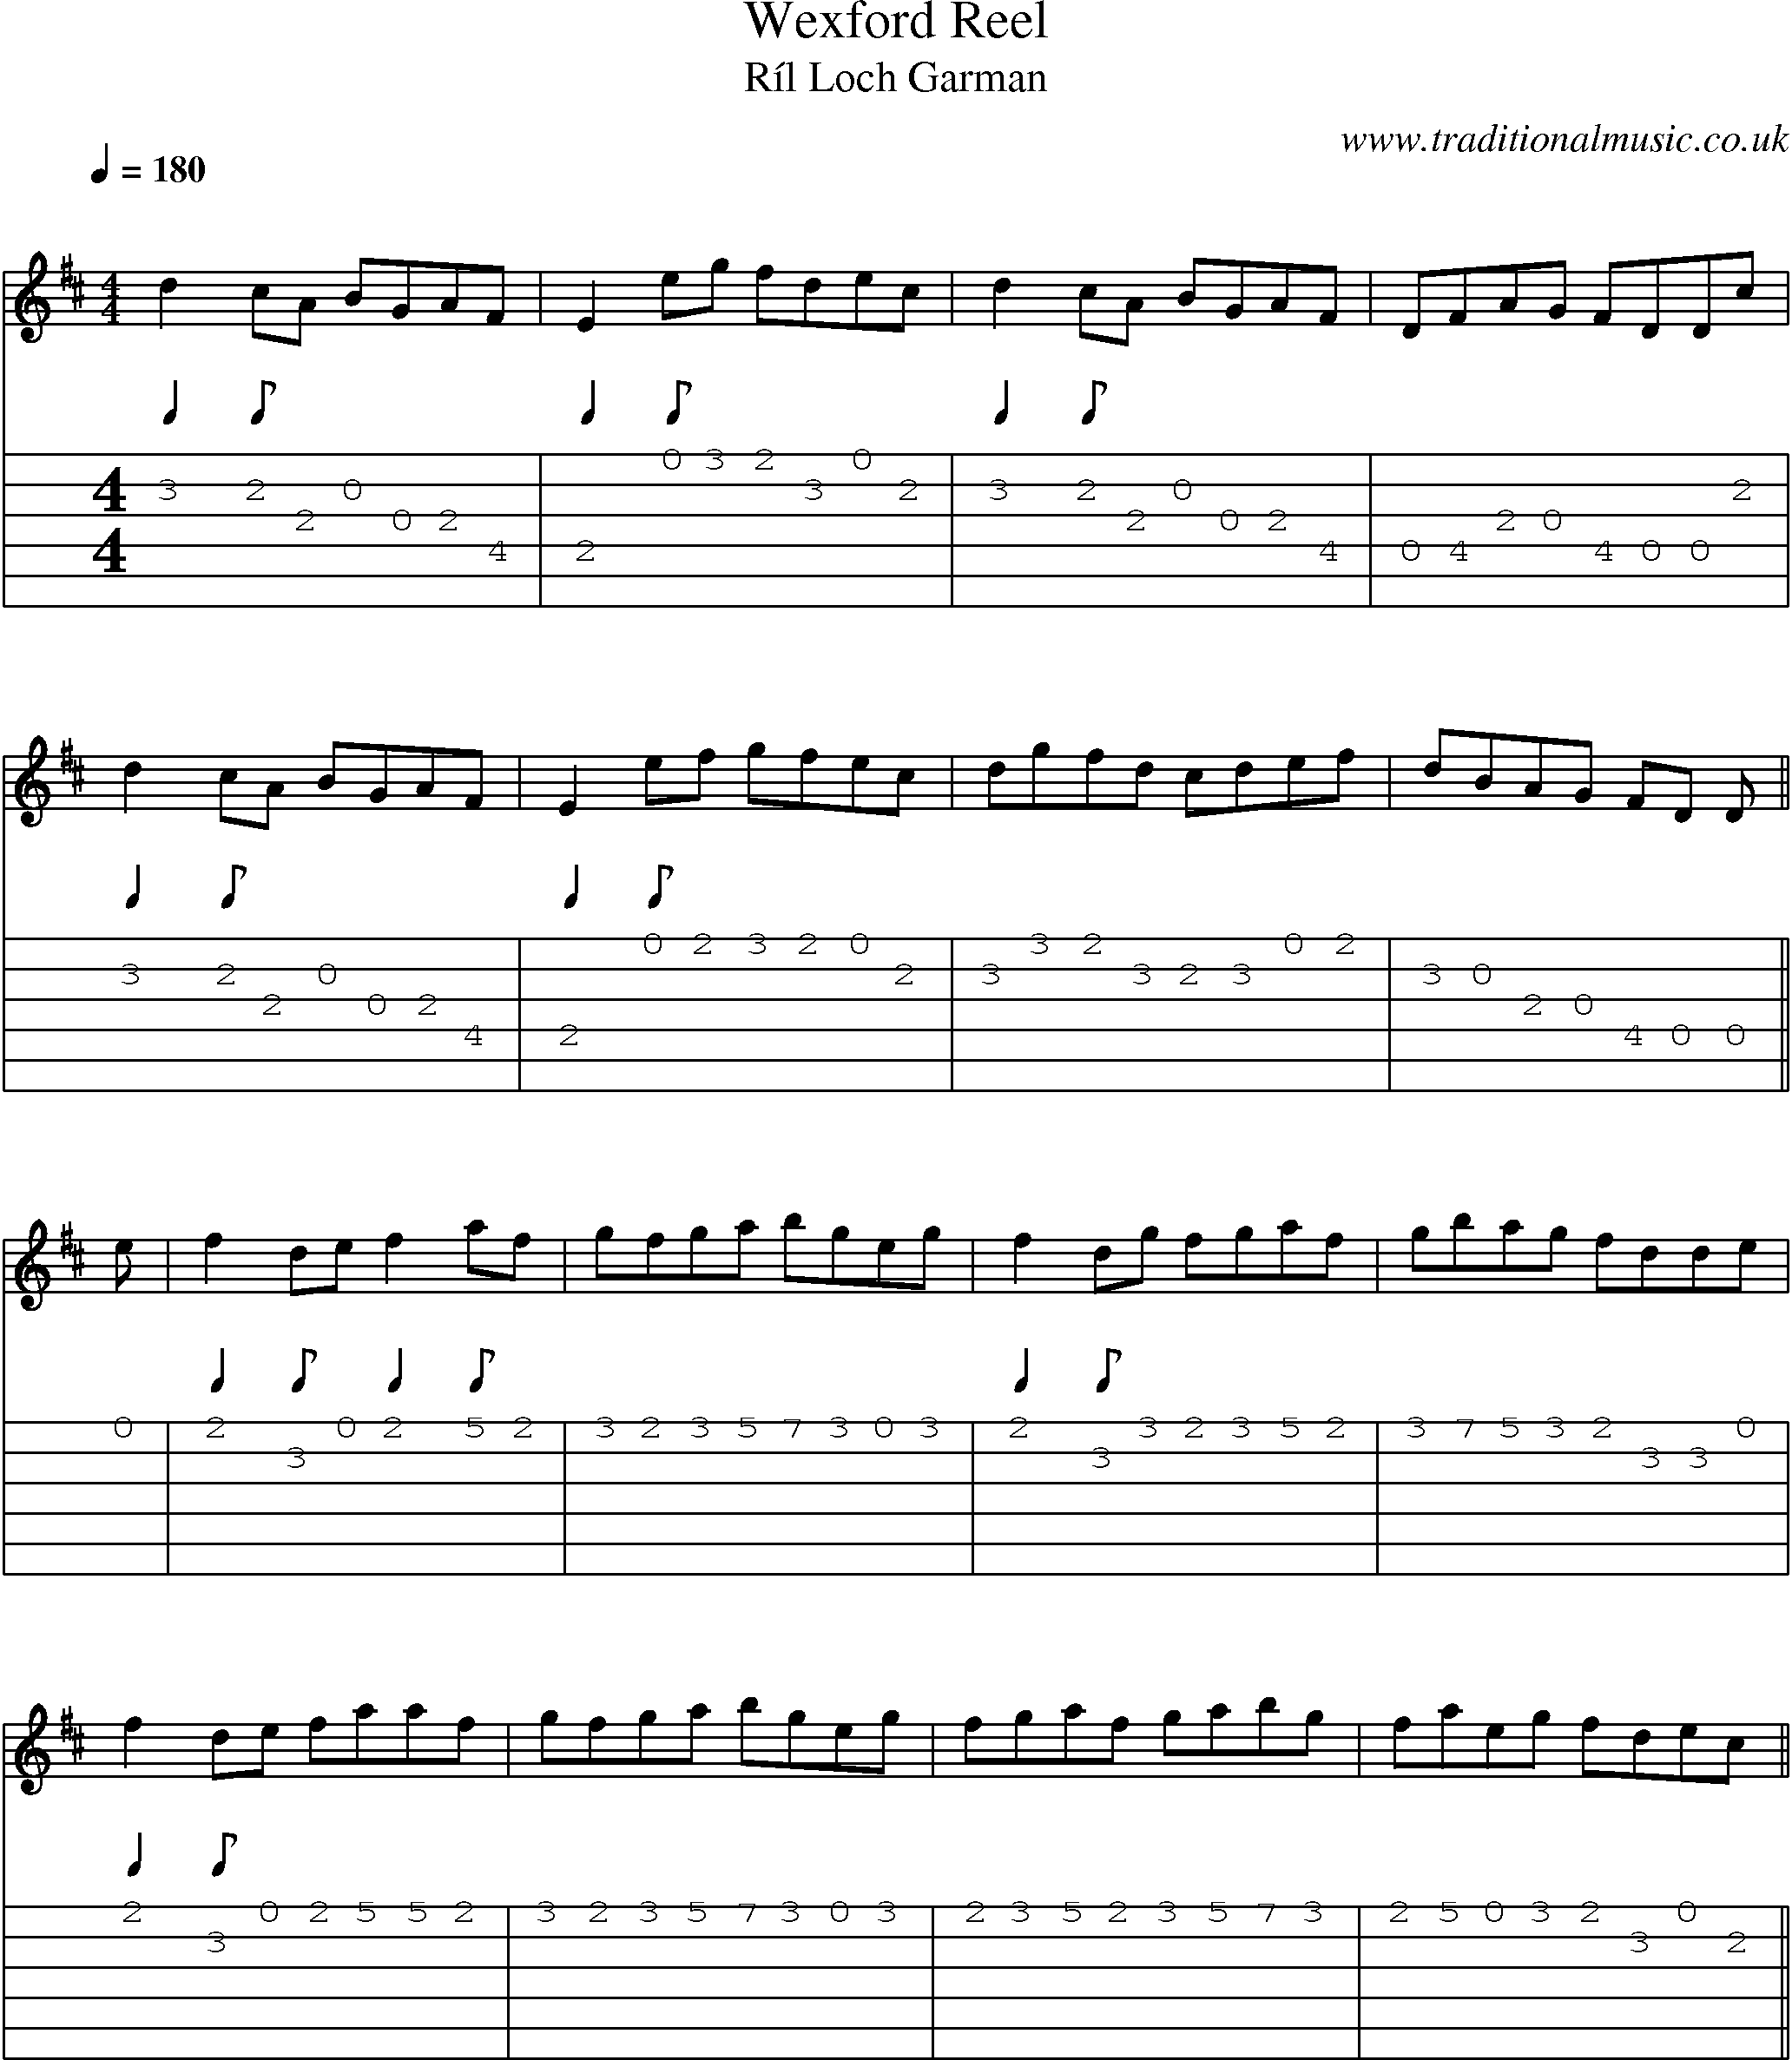 Music Score and Guitar Tabs for Wexford Reel